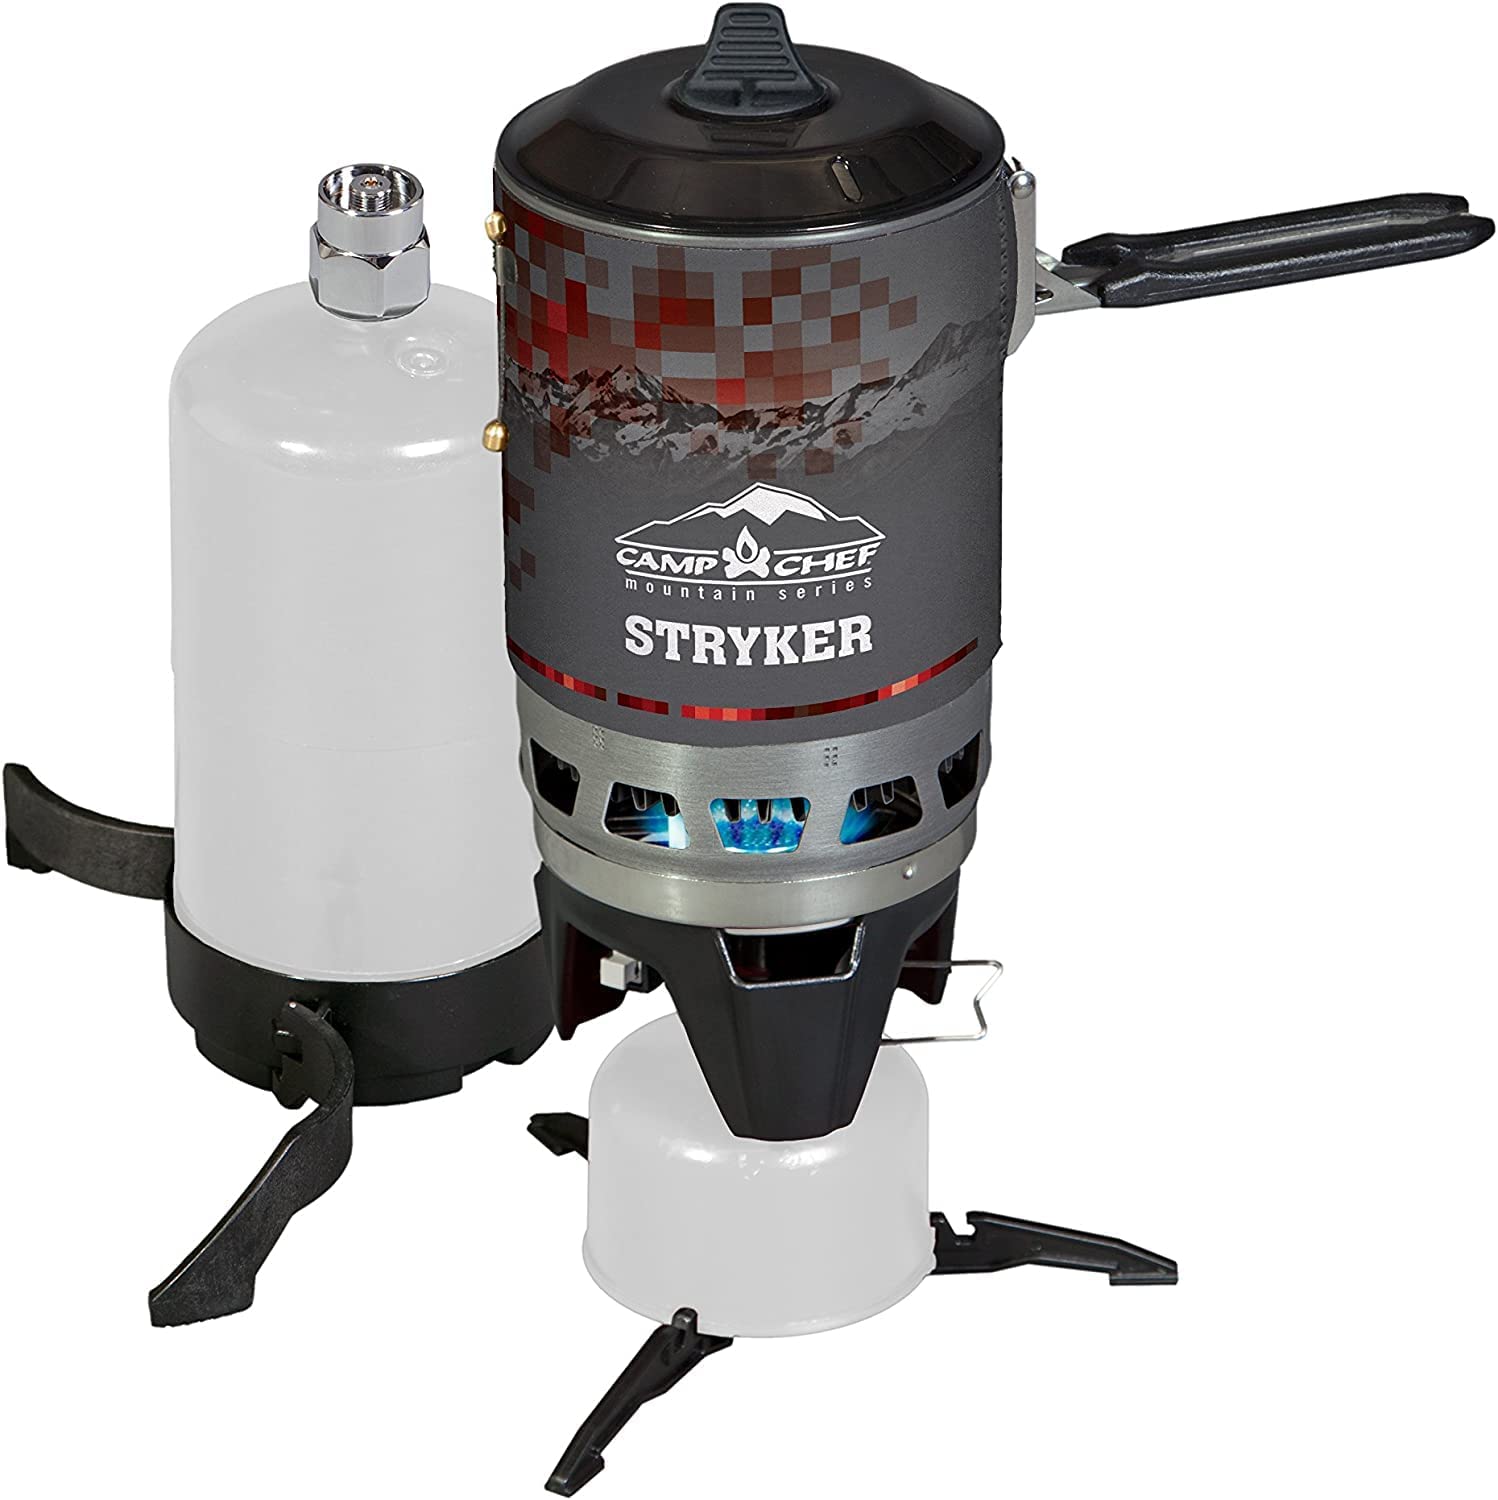 Camp Chef Stryker 200 Multi-Fuel Propane/Isobutane Outdoor Cooking System (MS200) $60.45 + Free Shipping